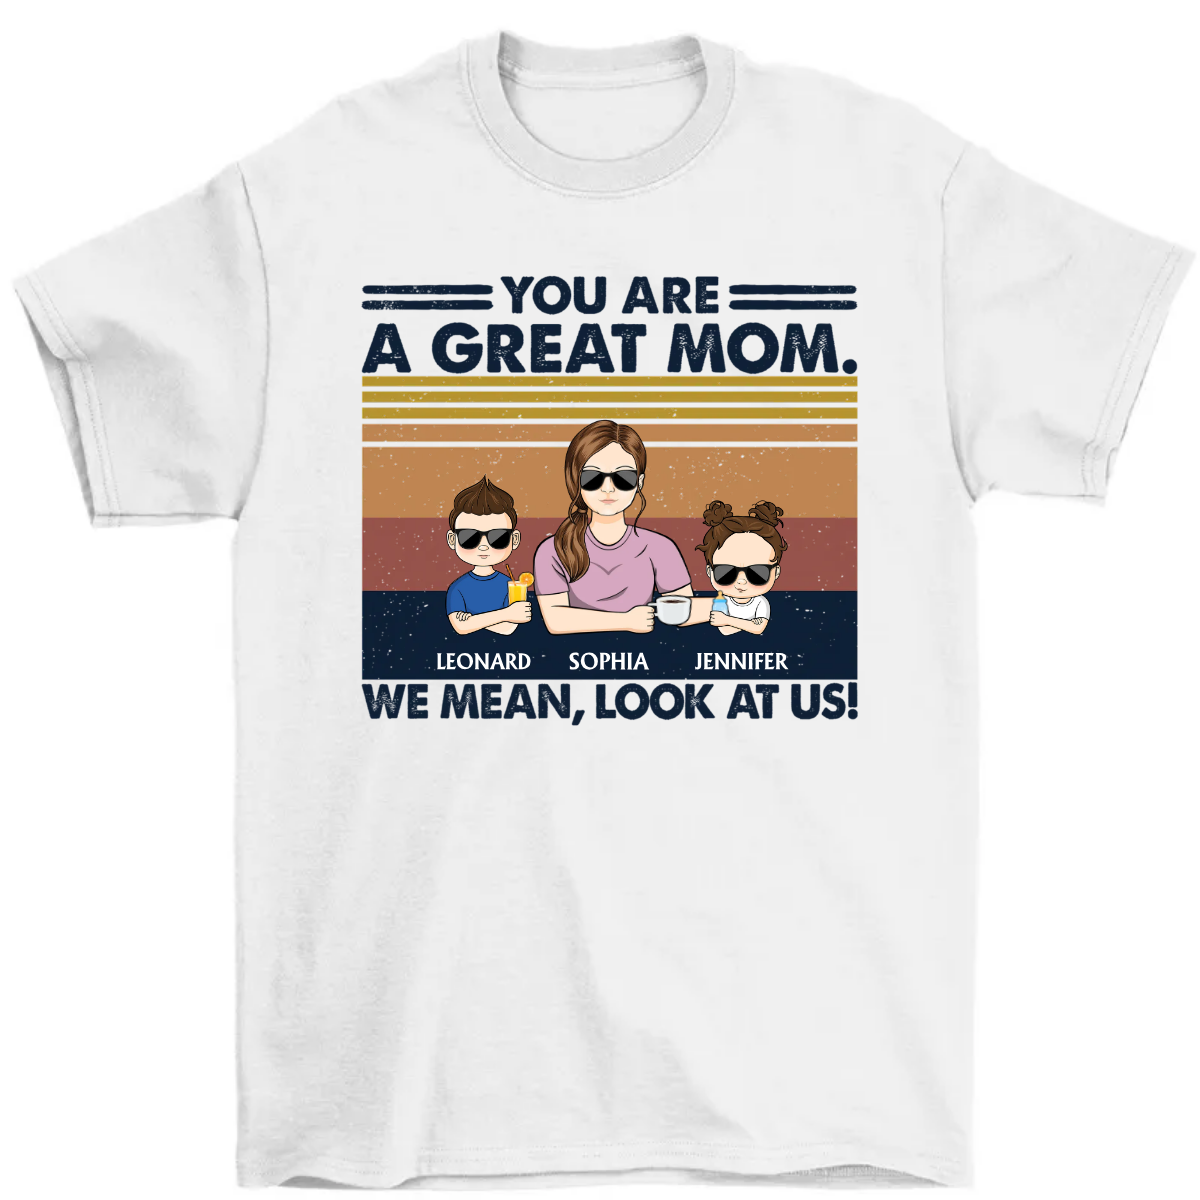 You Are A Great Mom - Birthday, Loving Gift For Mom, Mum, Mother - Personalized T Shirt